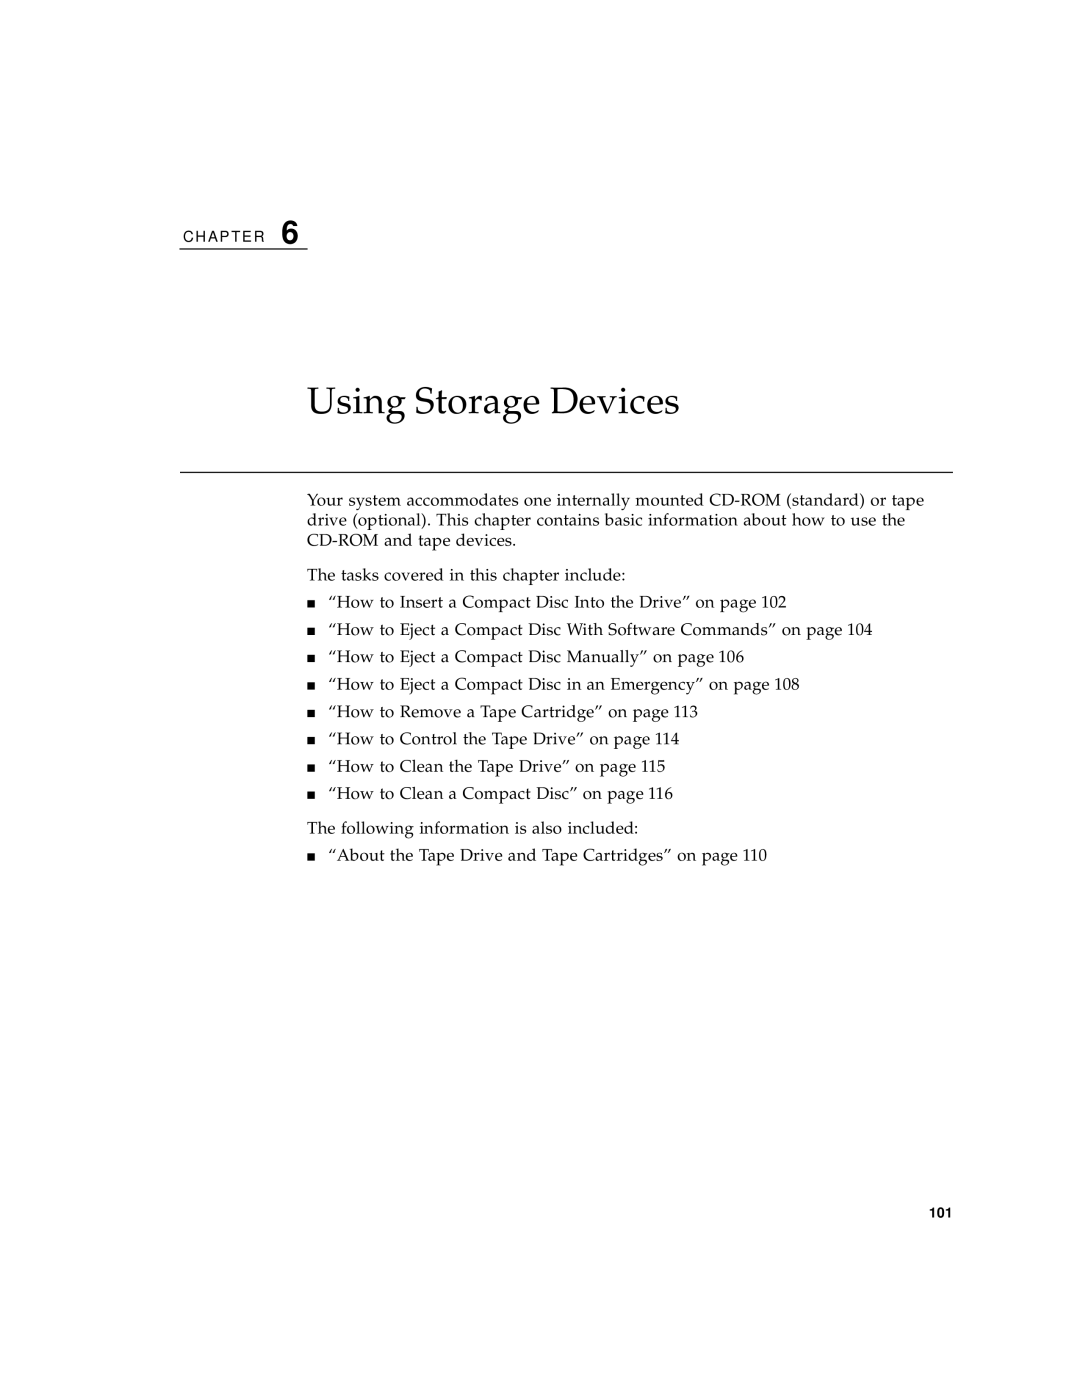 Sun Microsystems 220R manual Using Storage Devices 